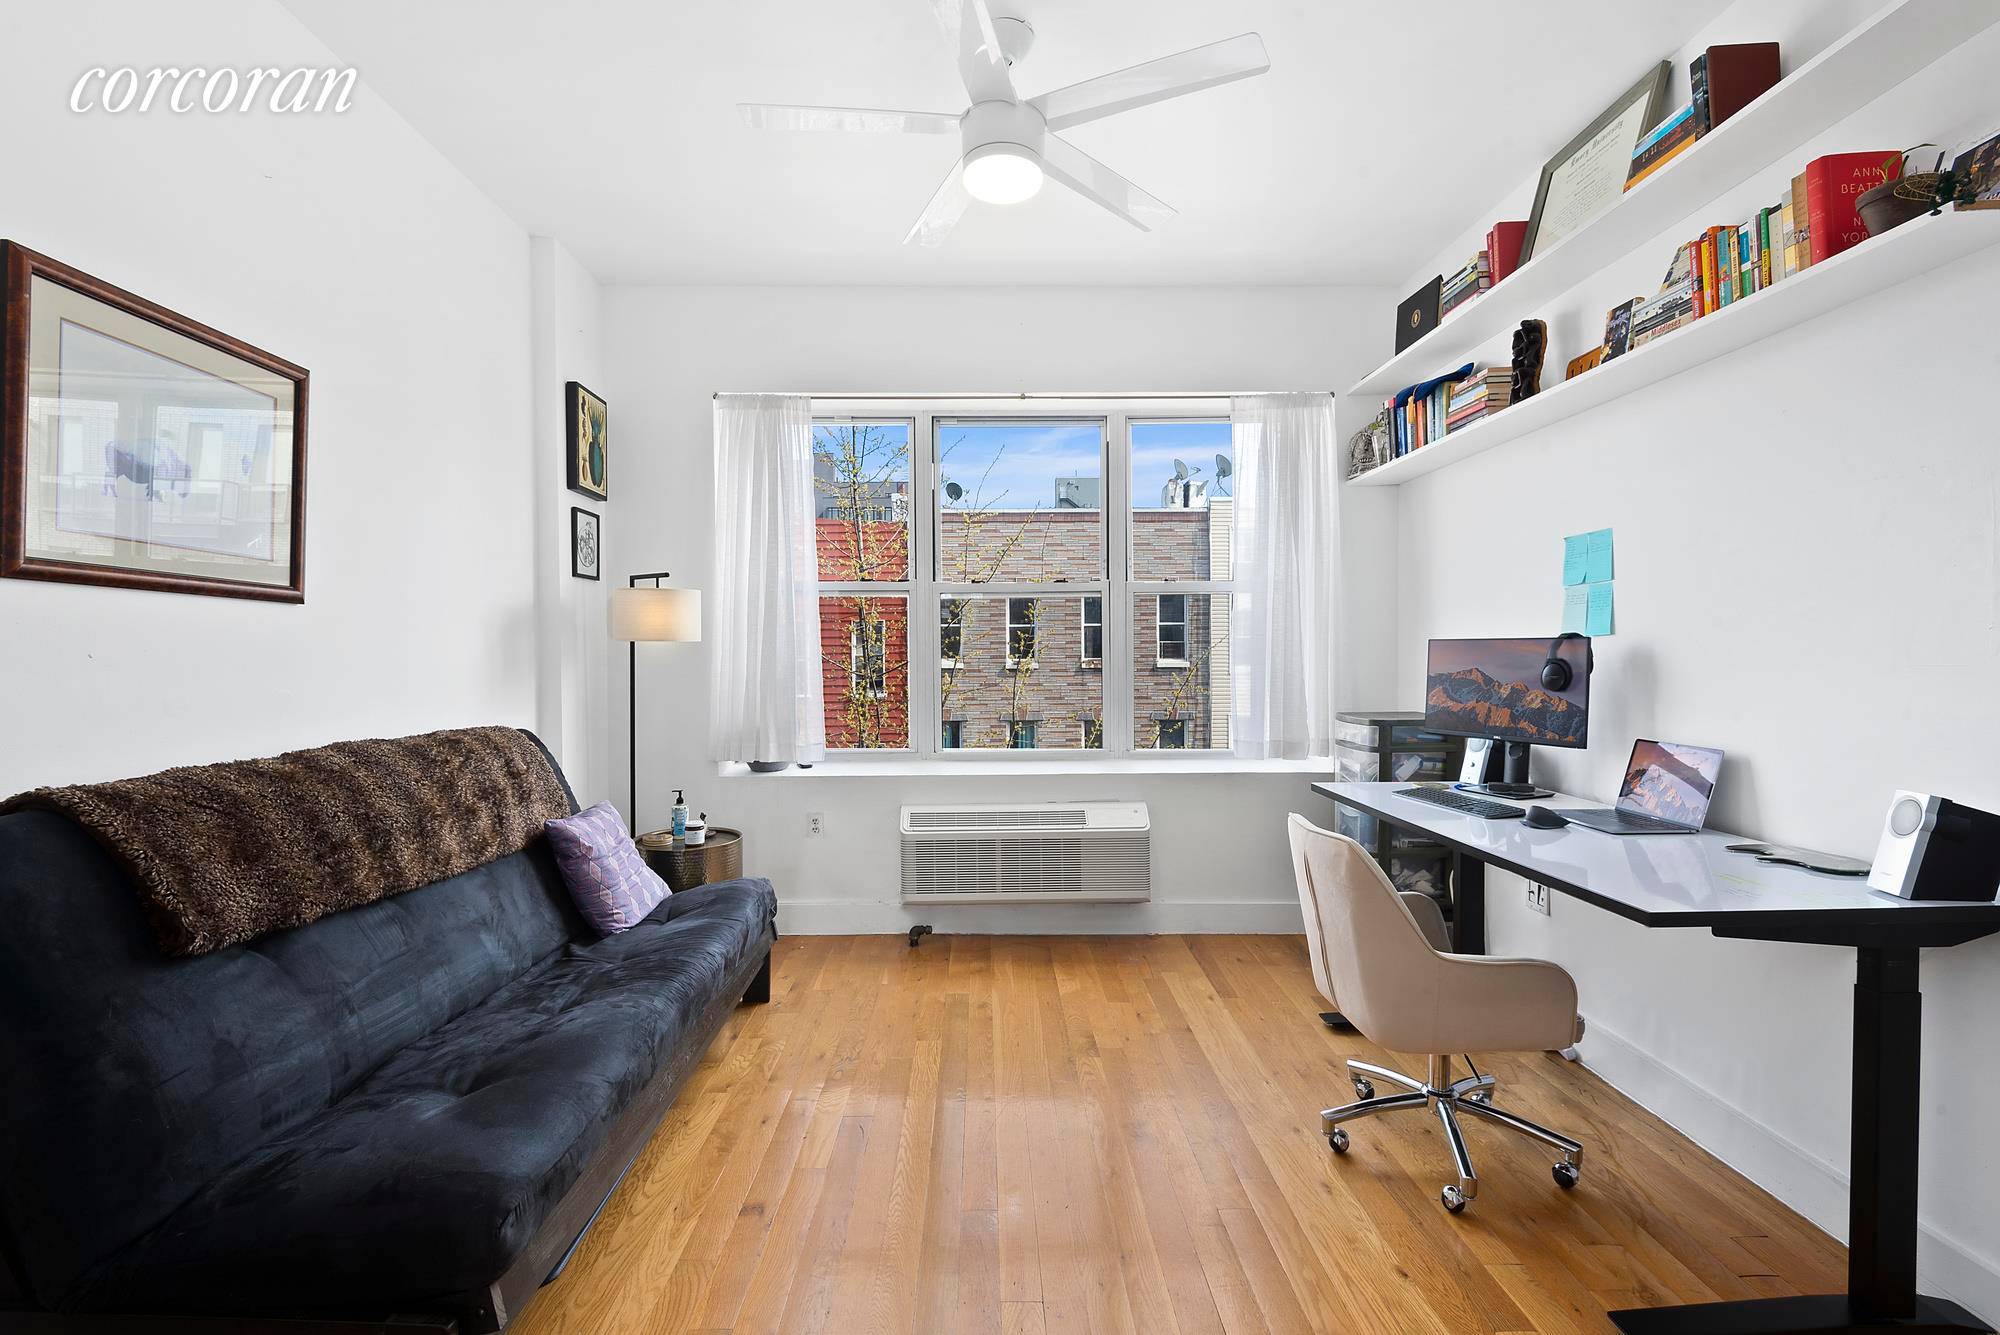 Introducing 241 Troutman Street 3R ; a carefully renovated convertible two bedroom loft in the heart of Bushwick between Wilson and Knickerbocker Avenue !